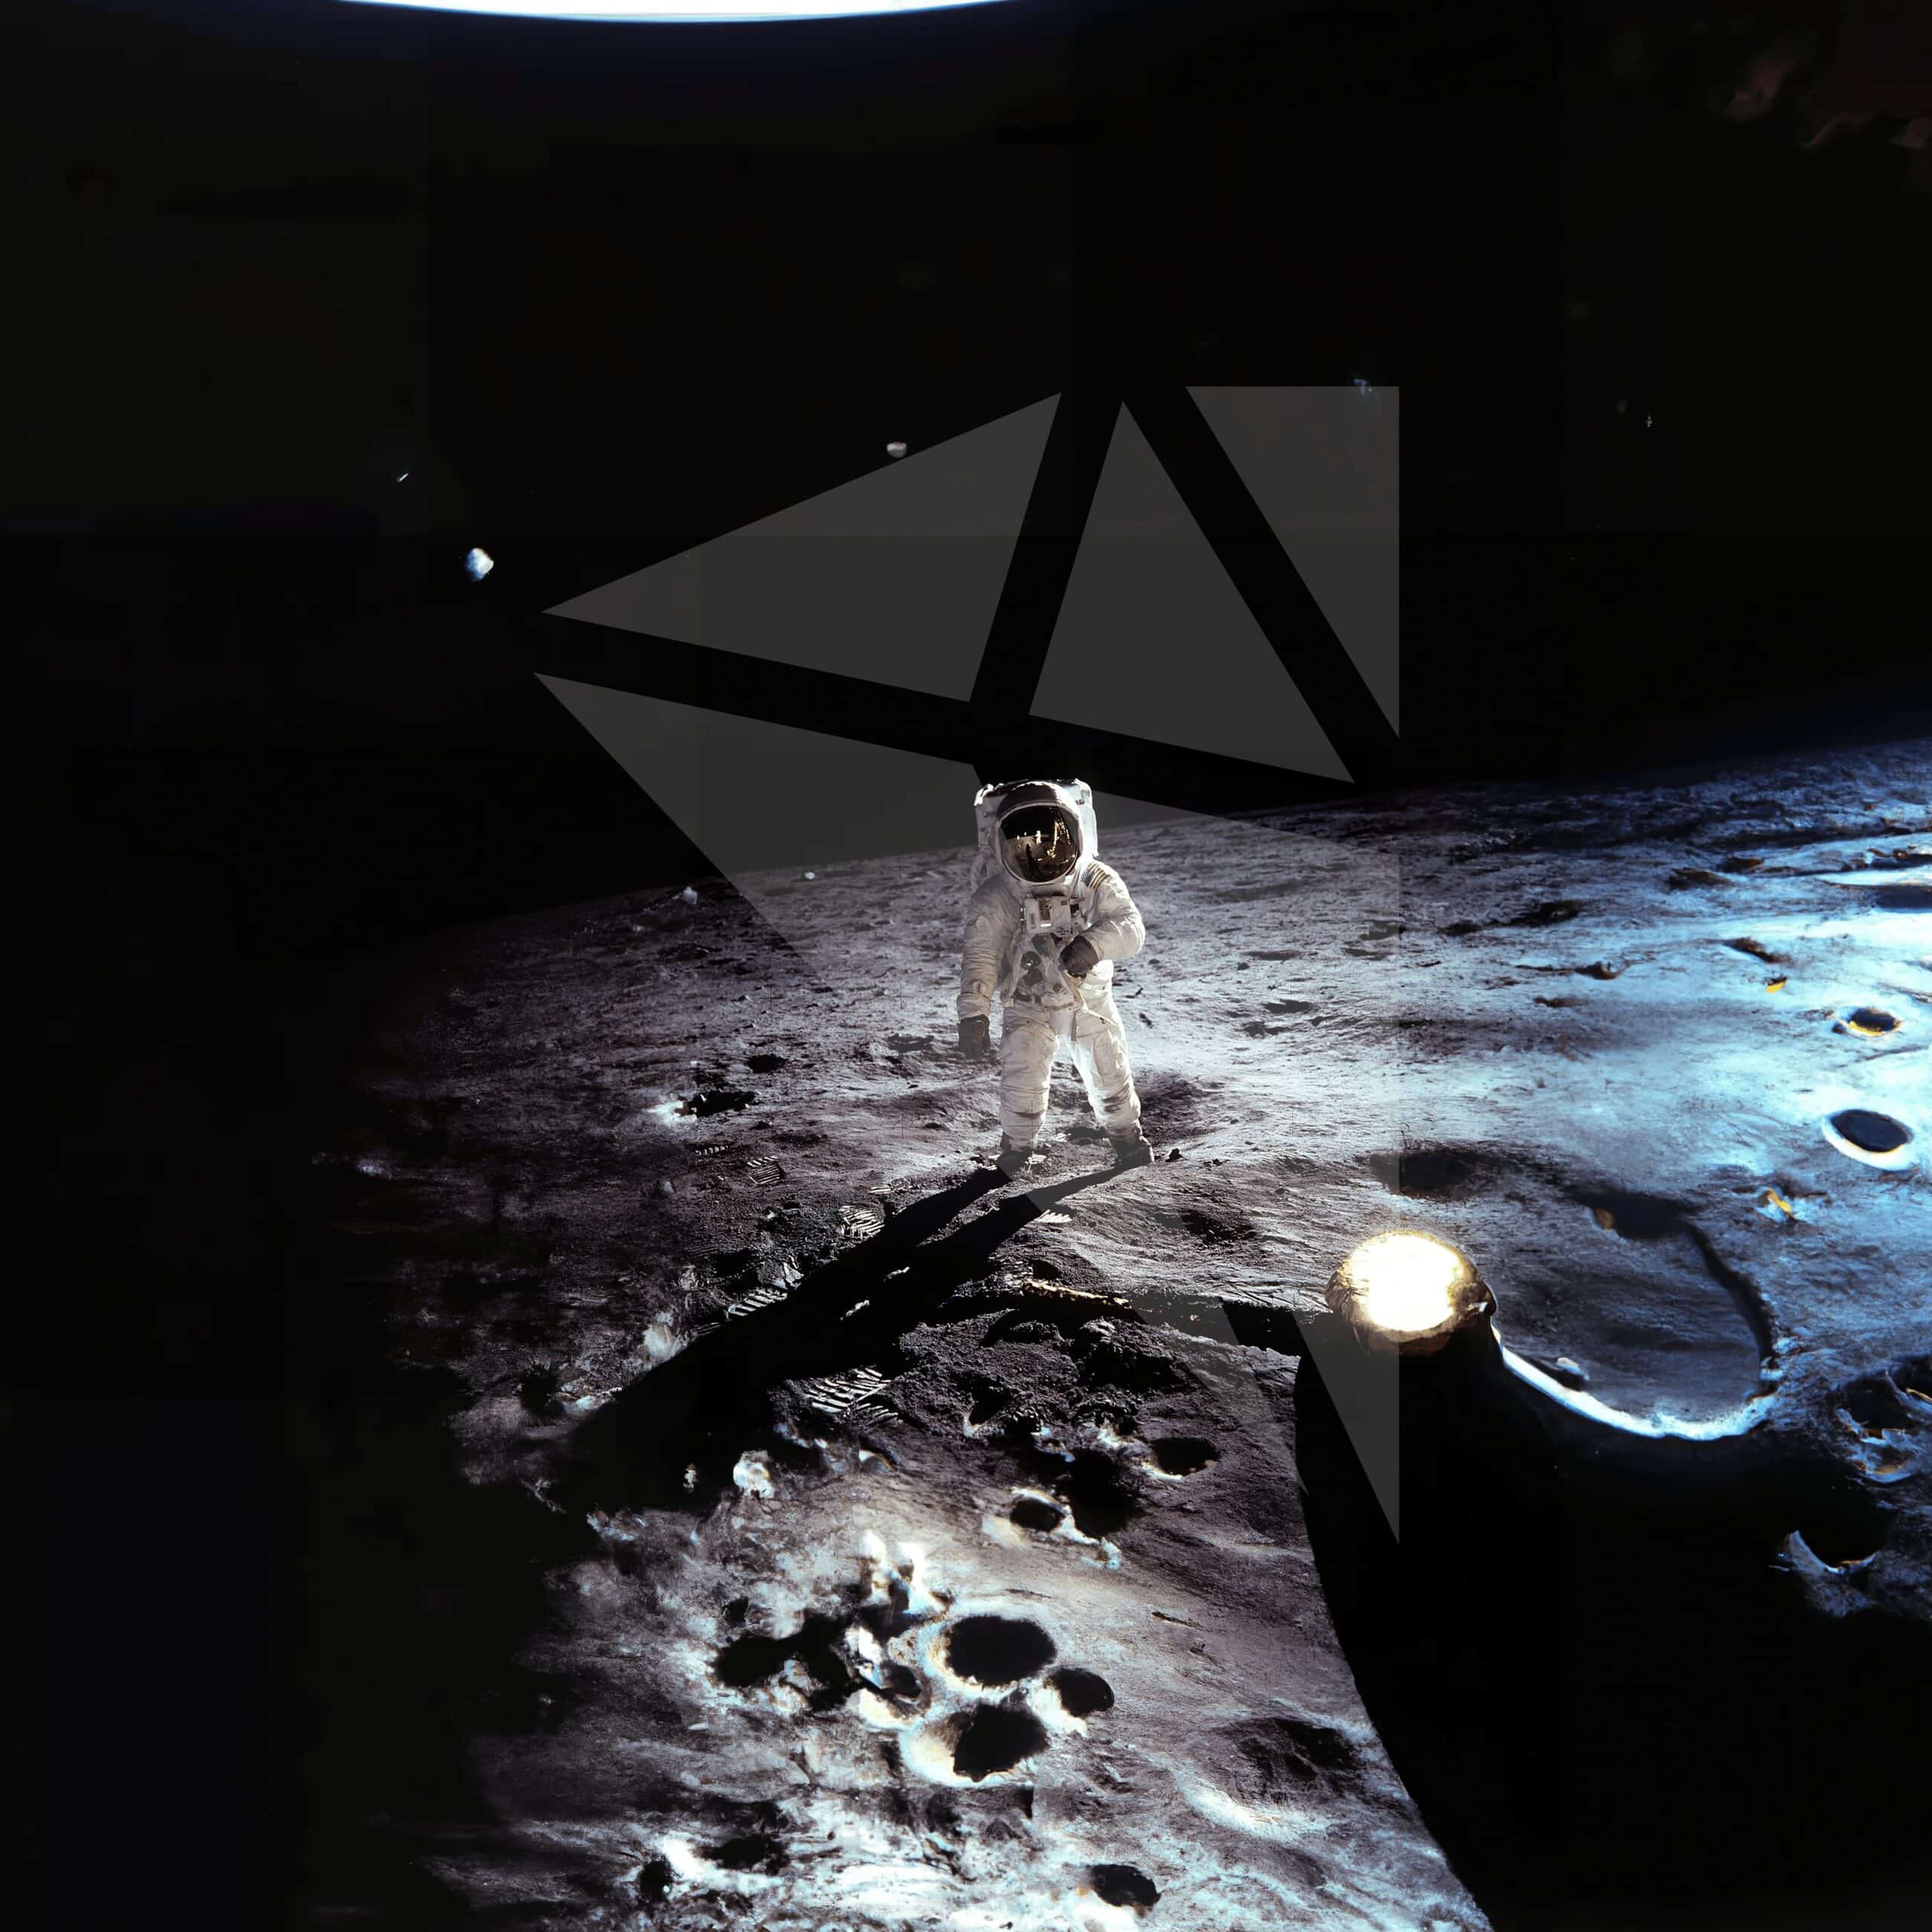 after image of dalle-2 generation moon landing used with outpainting, upscaled in GigaPixel AI